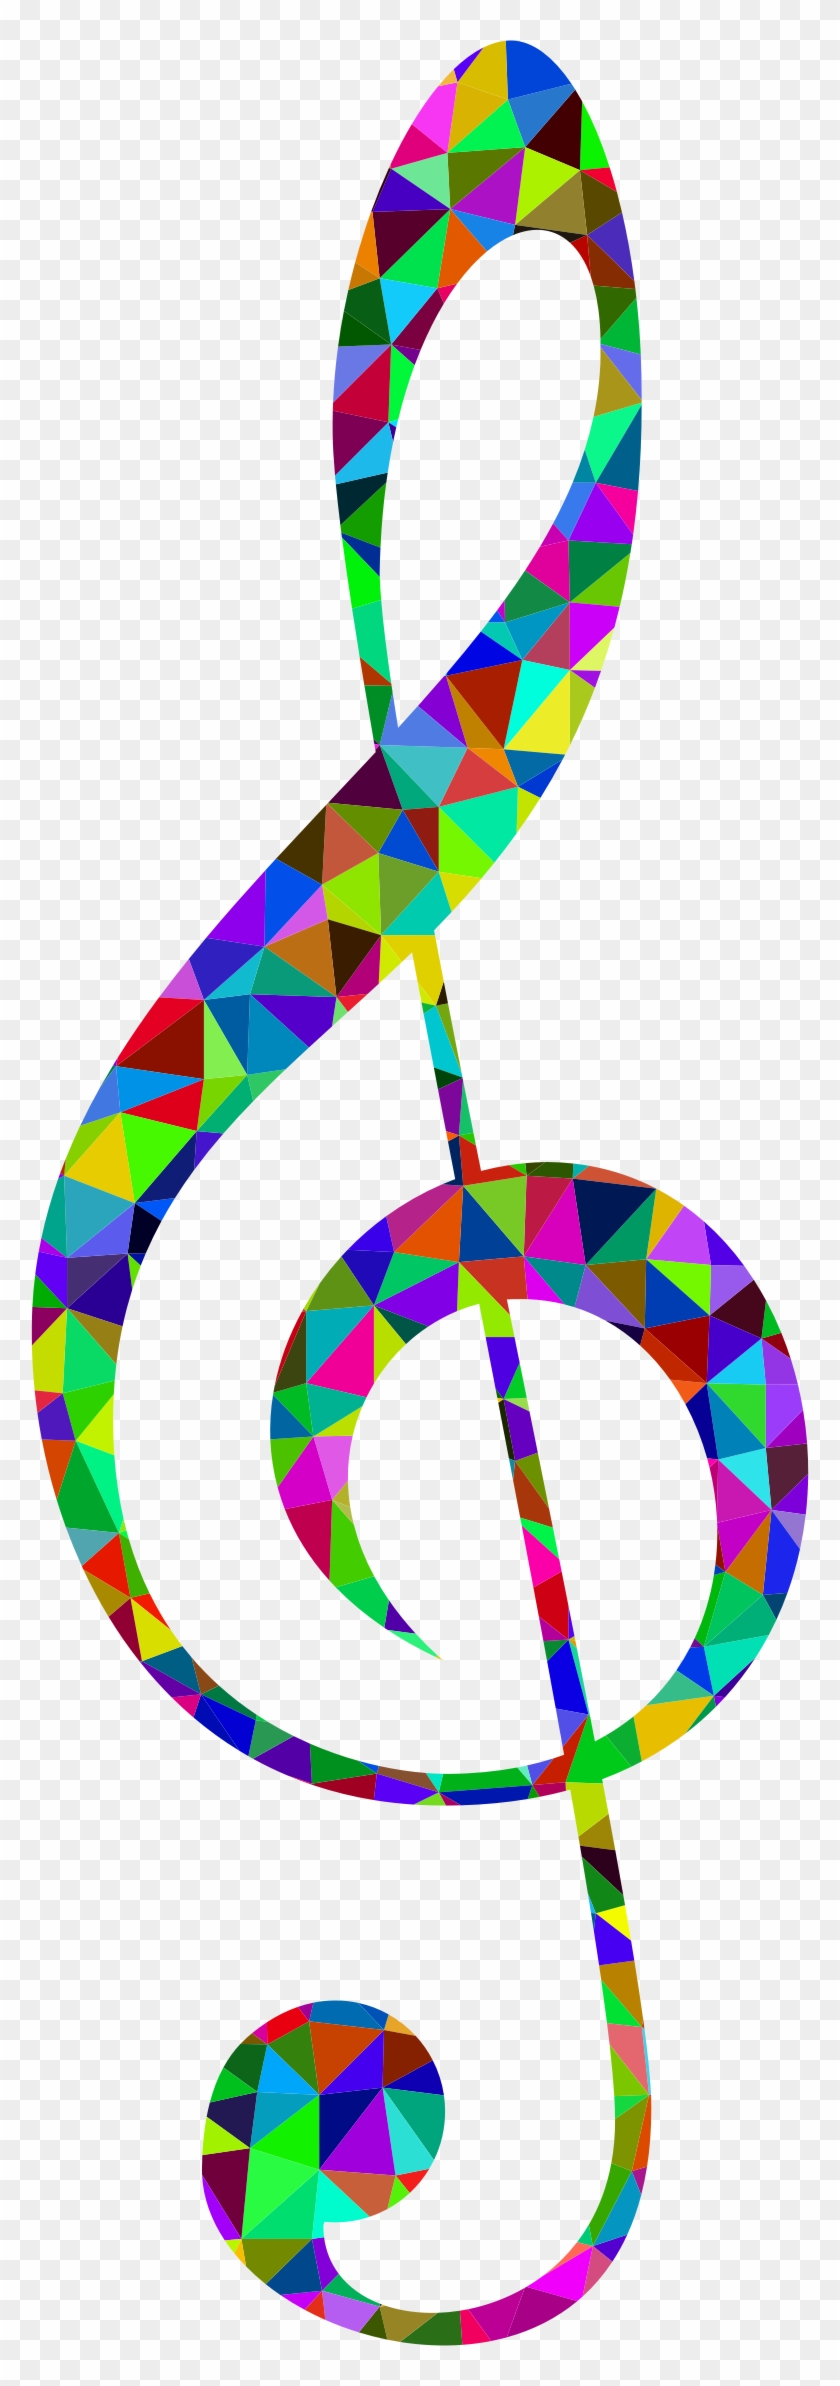 Big Image - Simple Music Notes #532844